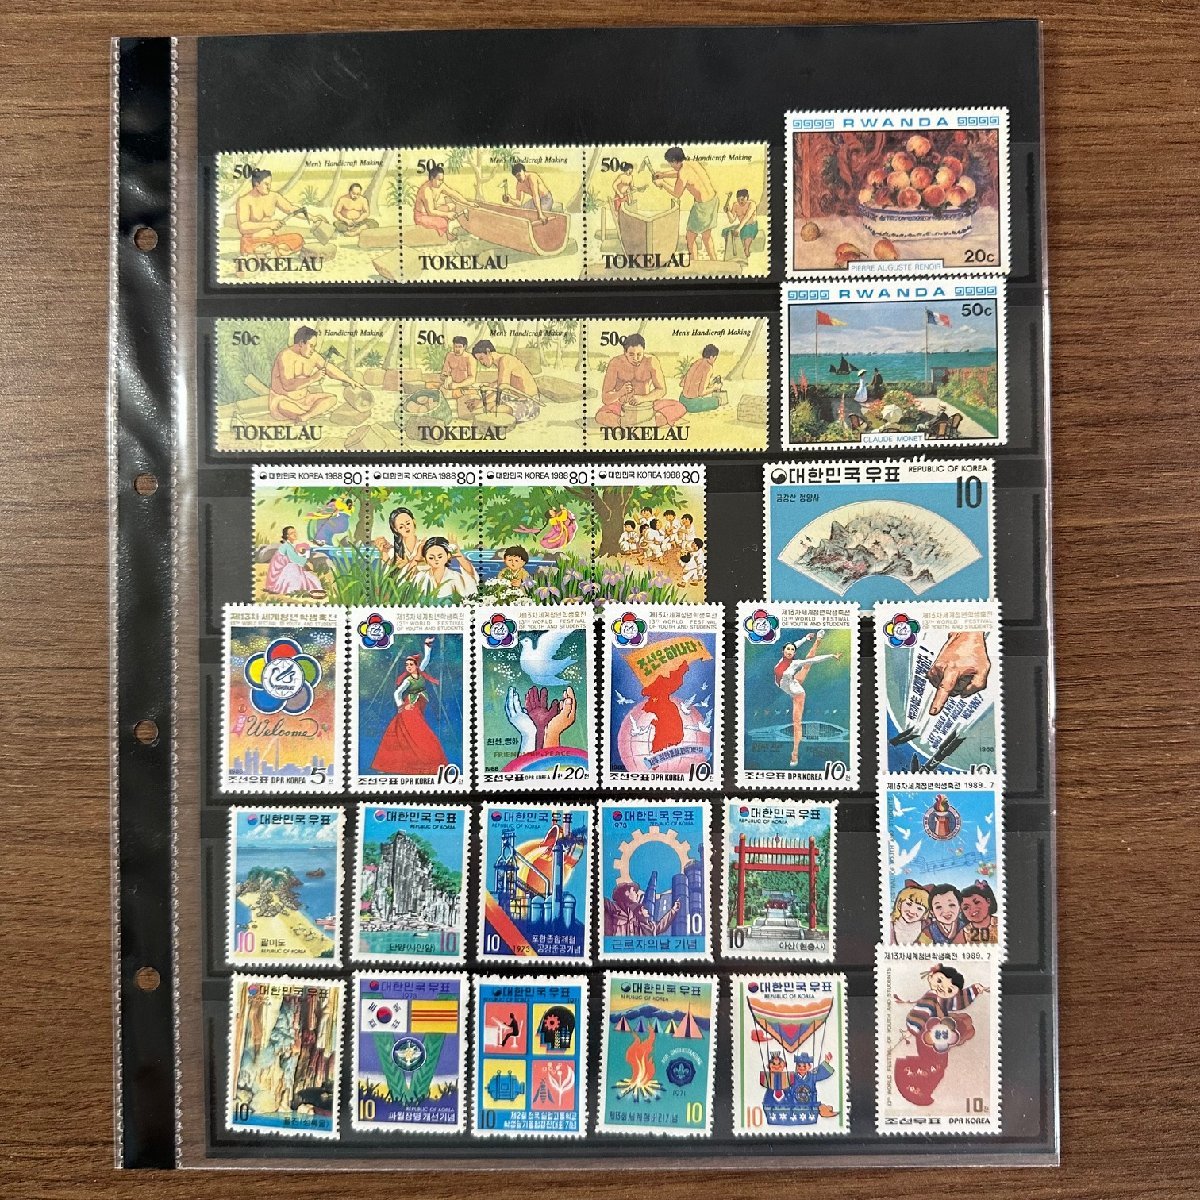 ** foreign stamp ** rare foreign stamp various unused . seal treasure searching collection house discharge goods 99